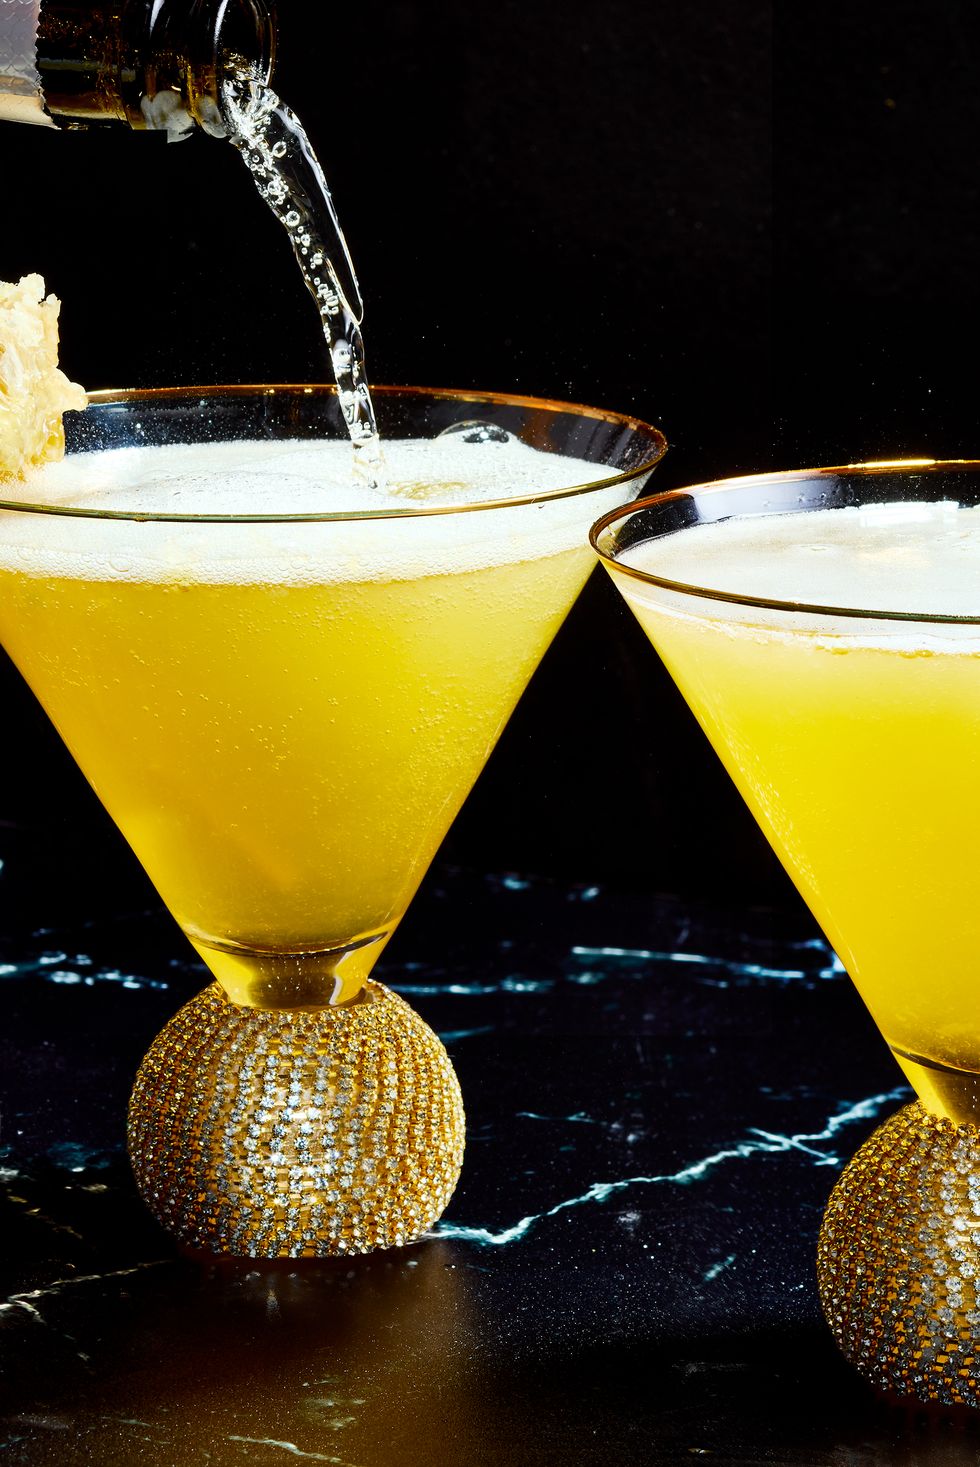 a blend of honey, tequila, peach nectar, and lemon juice makes this cocktail the perfect balance of sweet and tangy, while the prosecco keeps it light